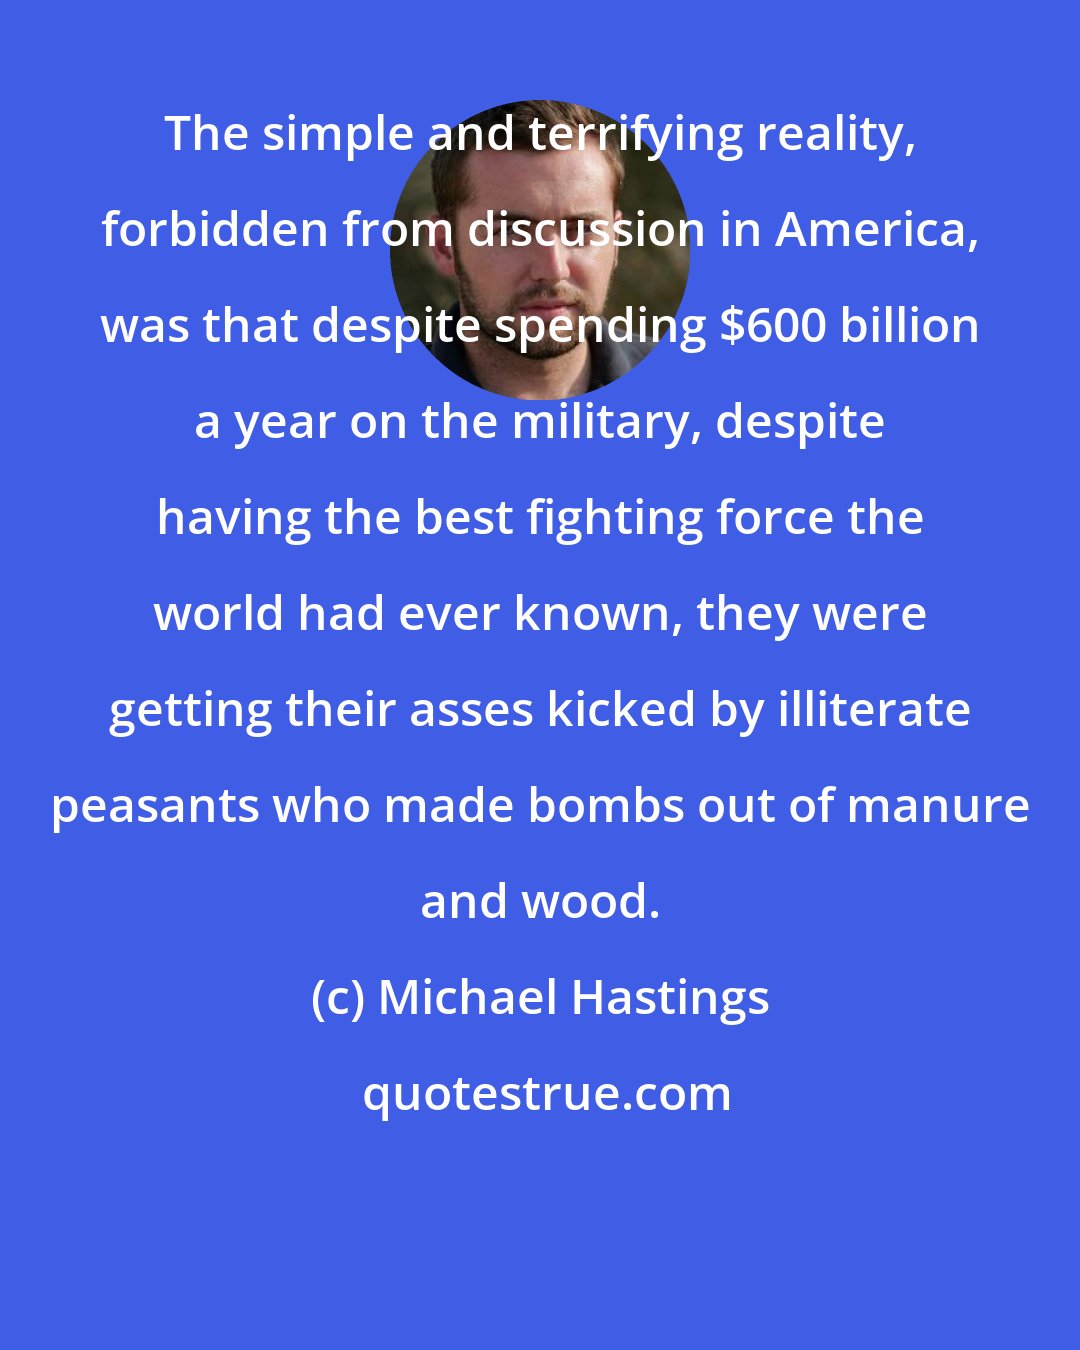 Michael Hastings: The simple and terrifying reality, forbidden from discussion in America, was that despite spending $600 billion a year on the military, despite having the best fighting force the world had ever known, they were getting their asses kicked by illiterate peasants who made bombs out of manure and wood.